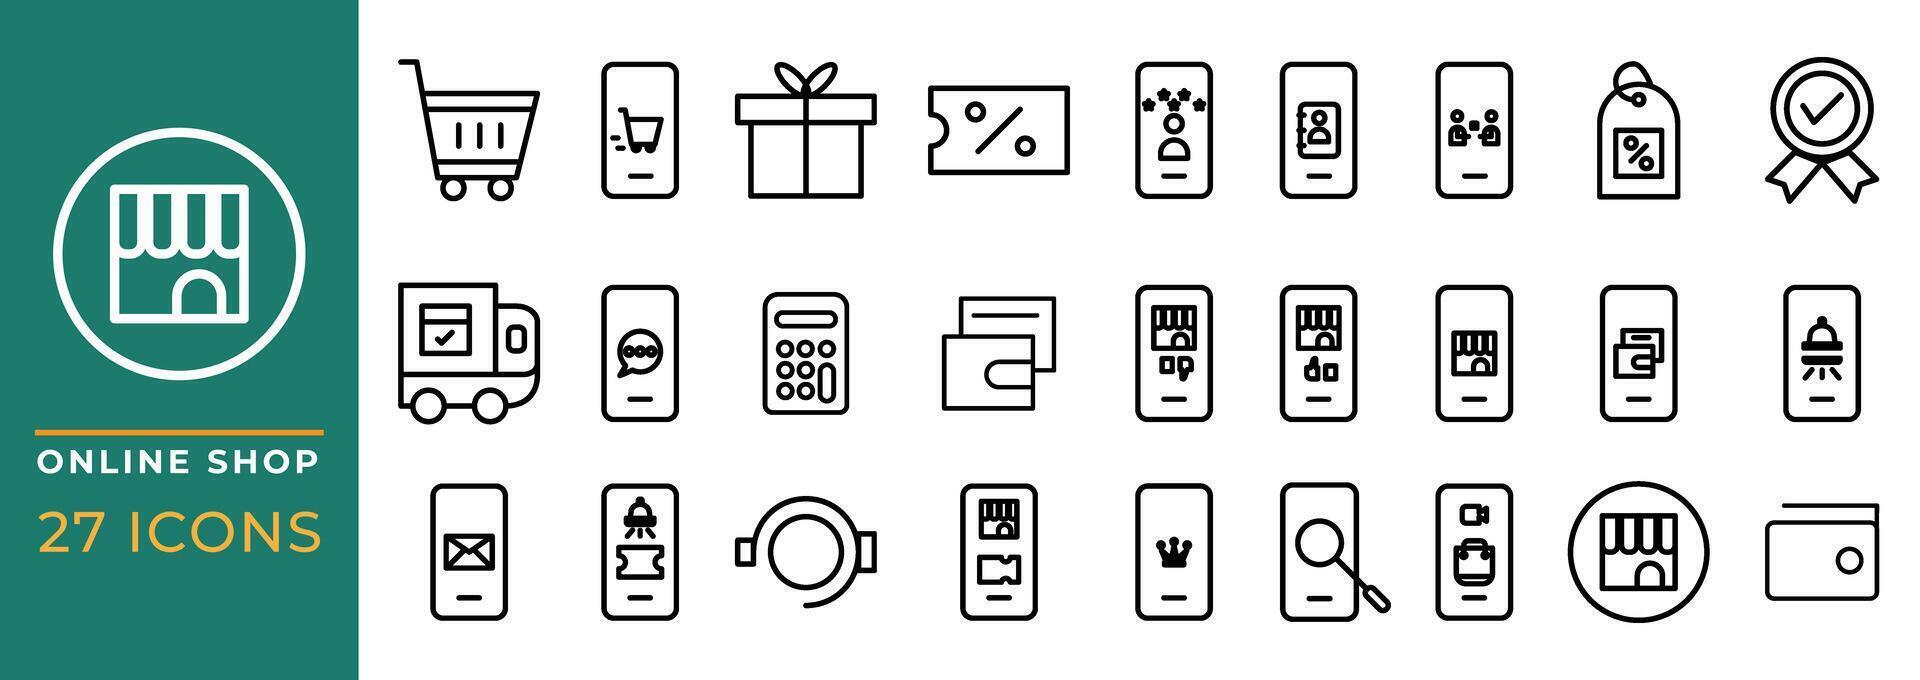 Set Online Shop icons Graphic design vector illustration. can be used for website interfaces, mobile applications and software